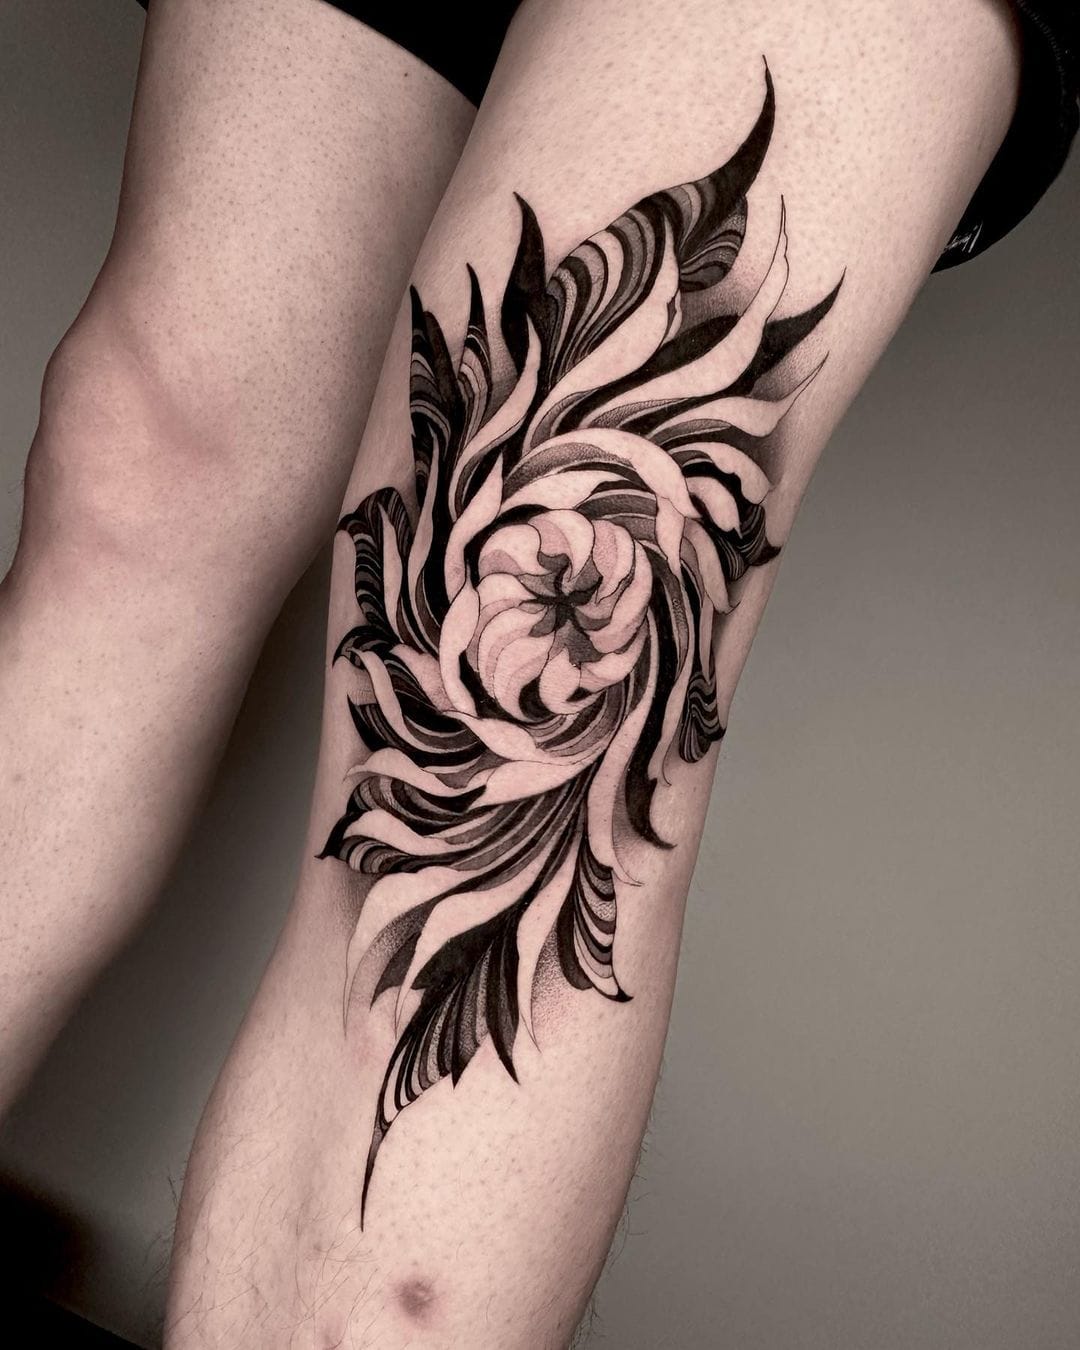 10 Sexy Thigh Tattoos For Women That Are Charmingly Beautiful | Blush